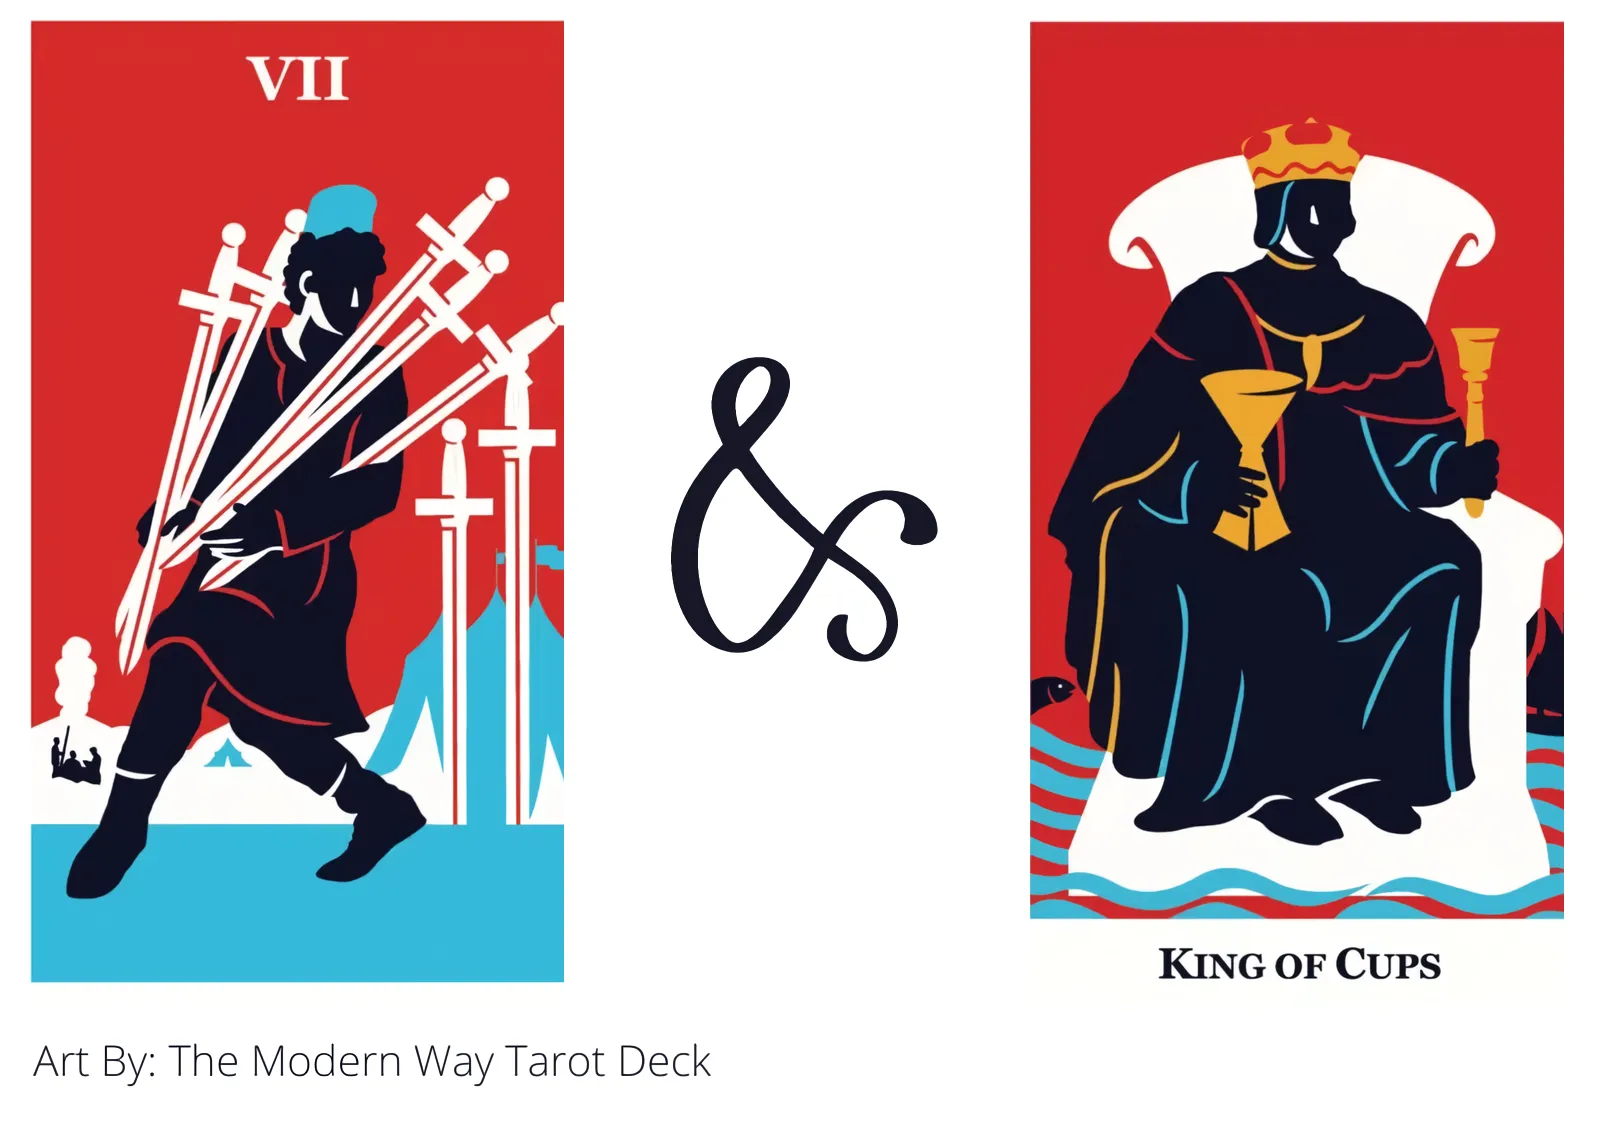 seven of swords and king of cups tarot cards together